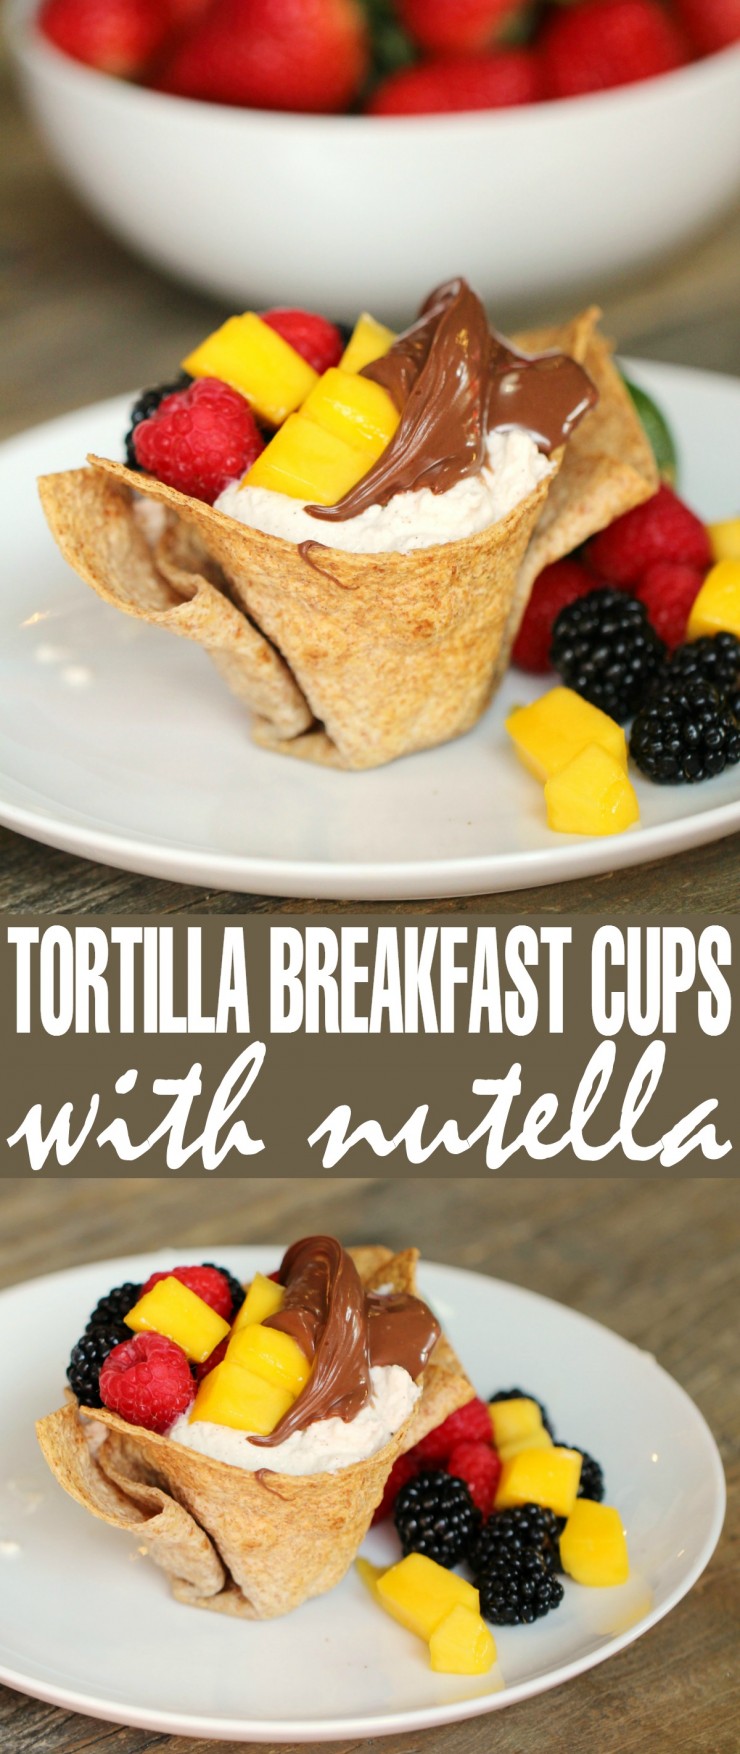 Bite into a crisp tortilla cup filled with a refreshing medley of mango, blackberry, raspberry and Nutella®. Add a little joy to everyone’s morning by serving this delightful breakfast.